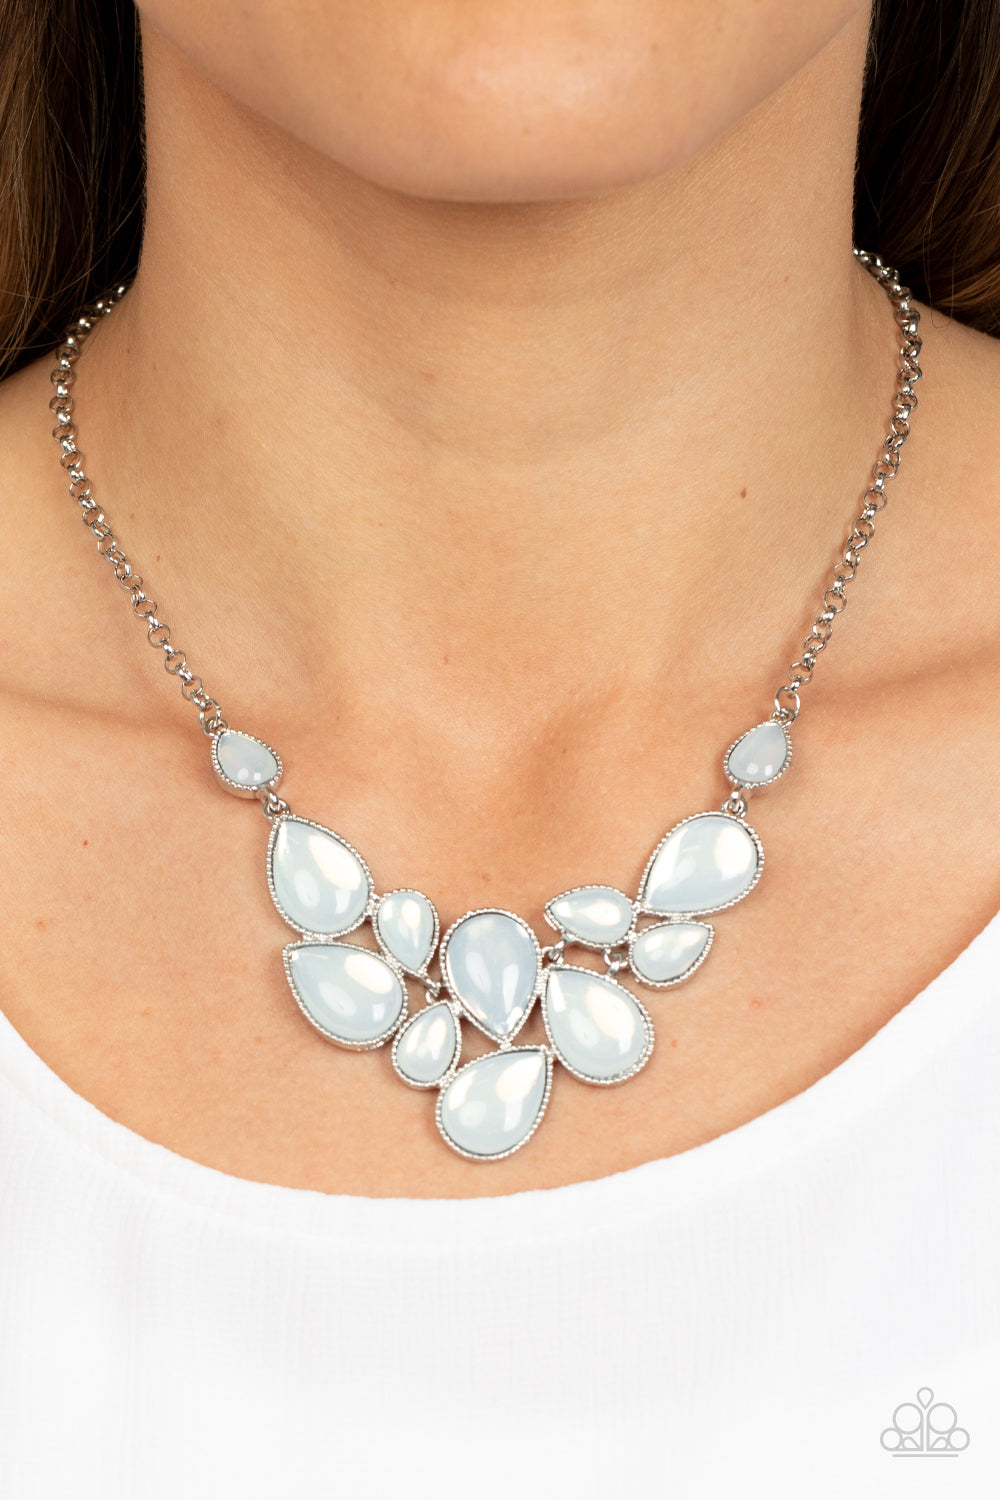 Targeted Tranquility - White & Silver Necklace - Paparazzi Accessories –  Bejeweled Accessories By Kristie